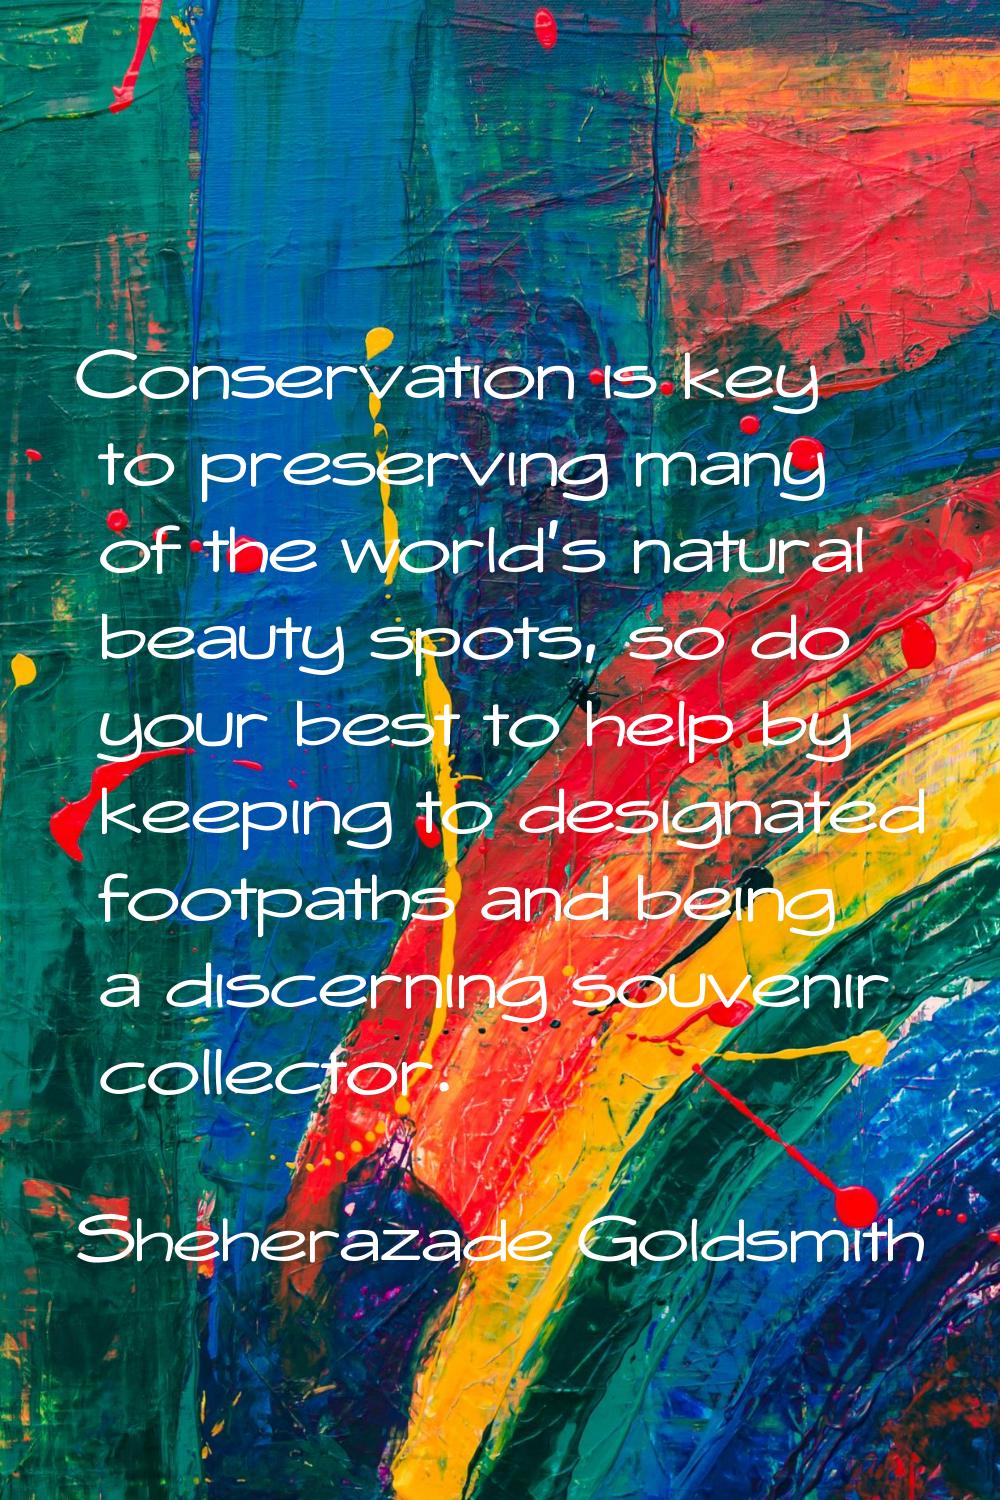 Conservation is key to preserving many of the world's natural beauty spots, so do your best to help